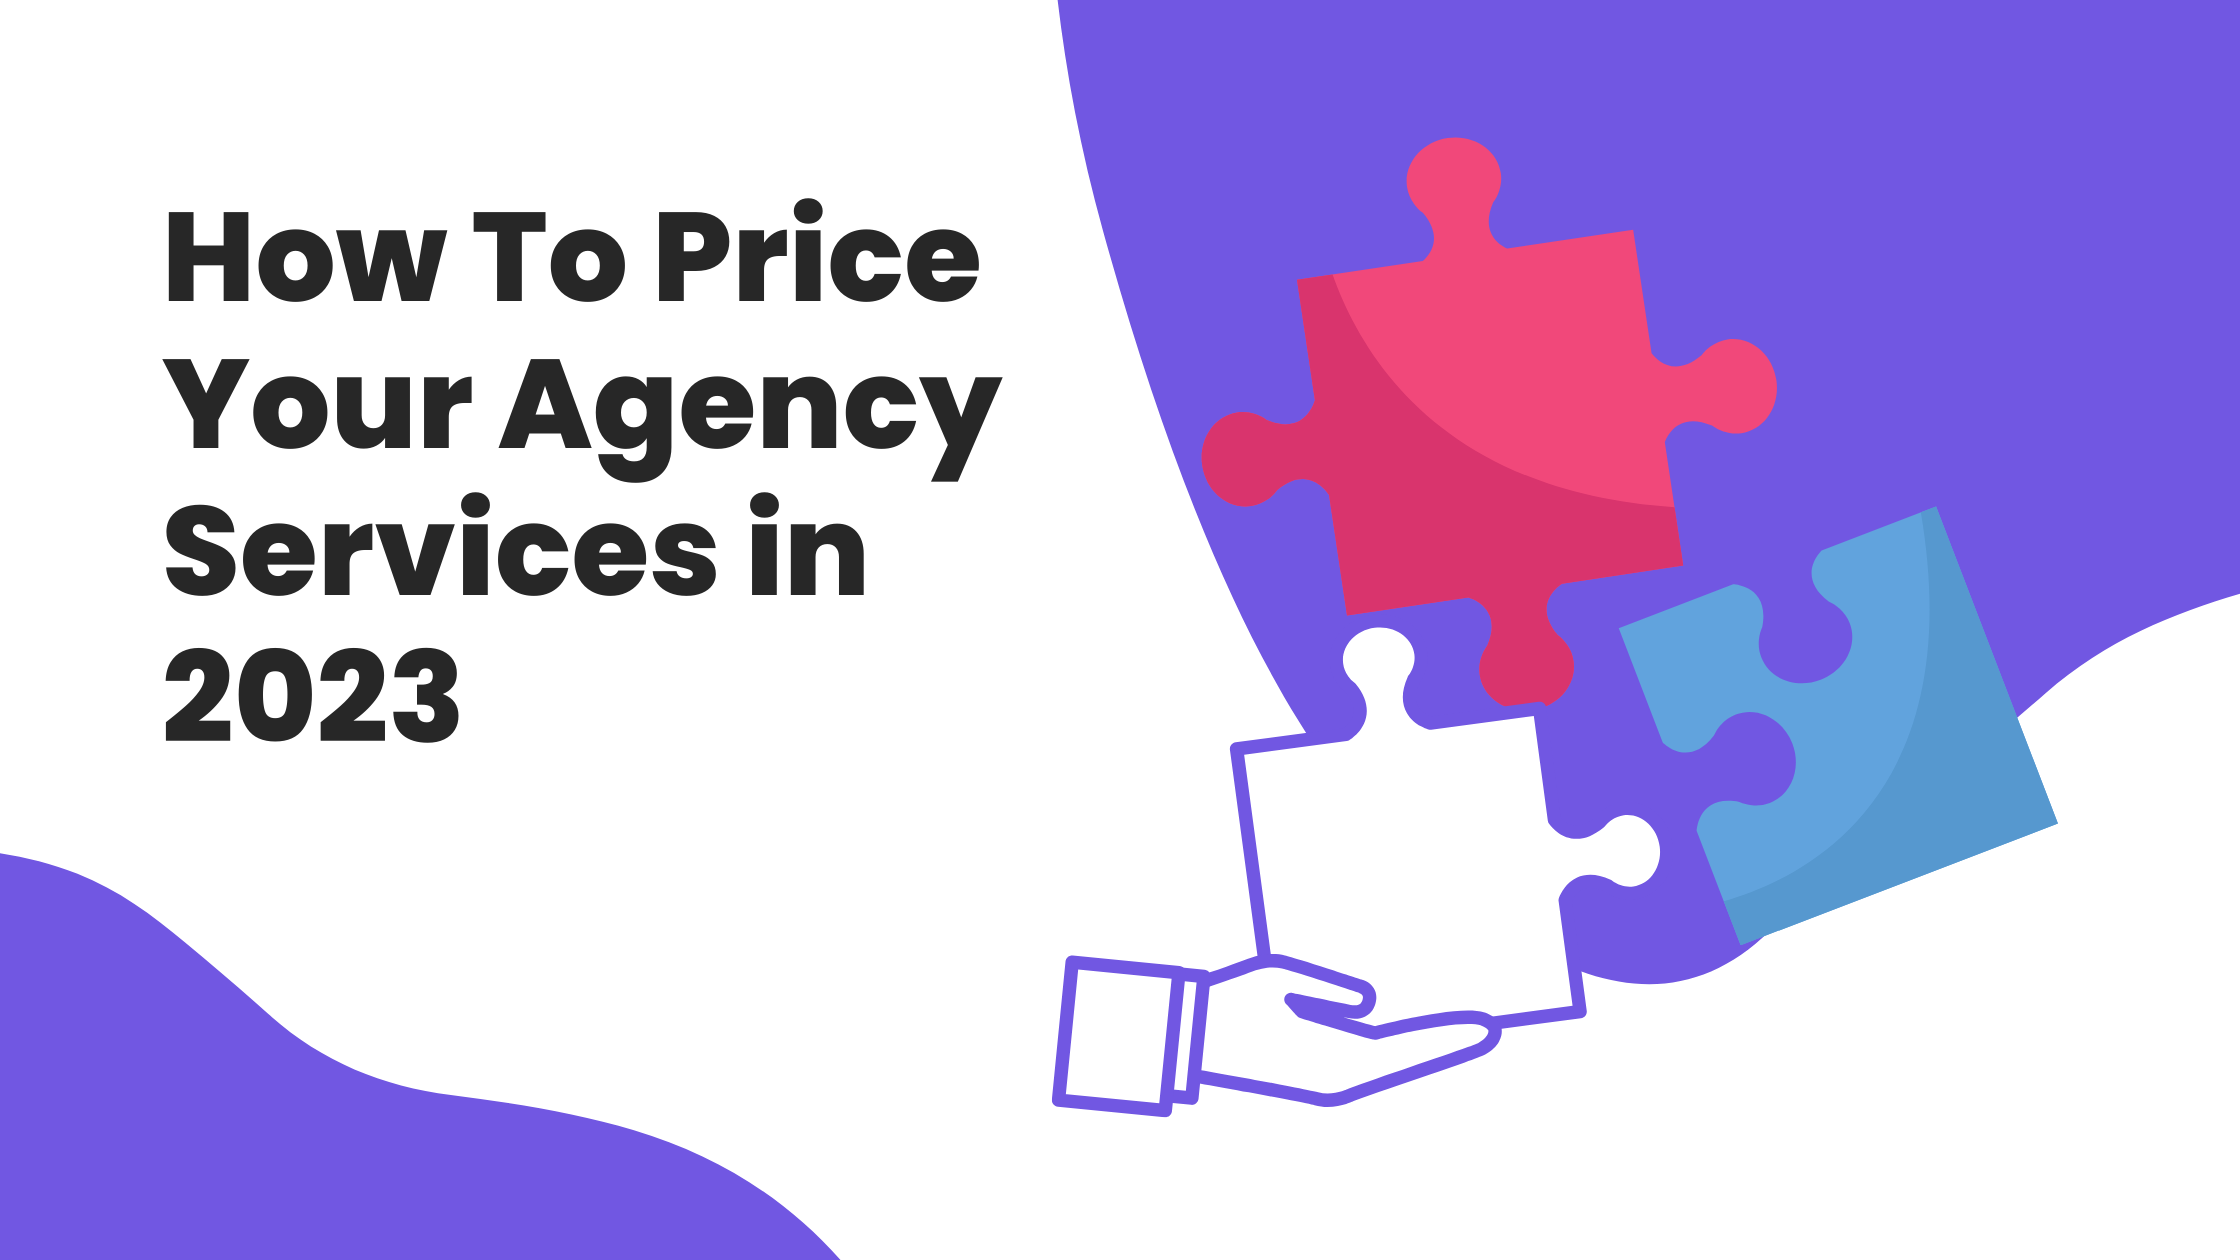 How To Price Your Agency Services